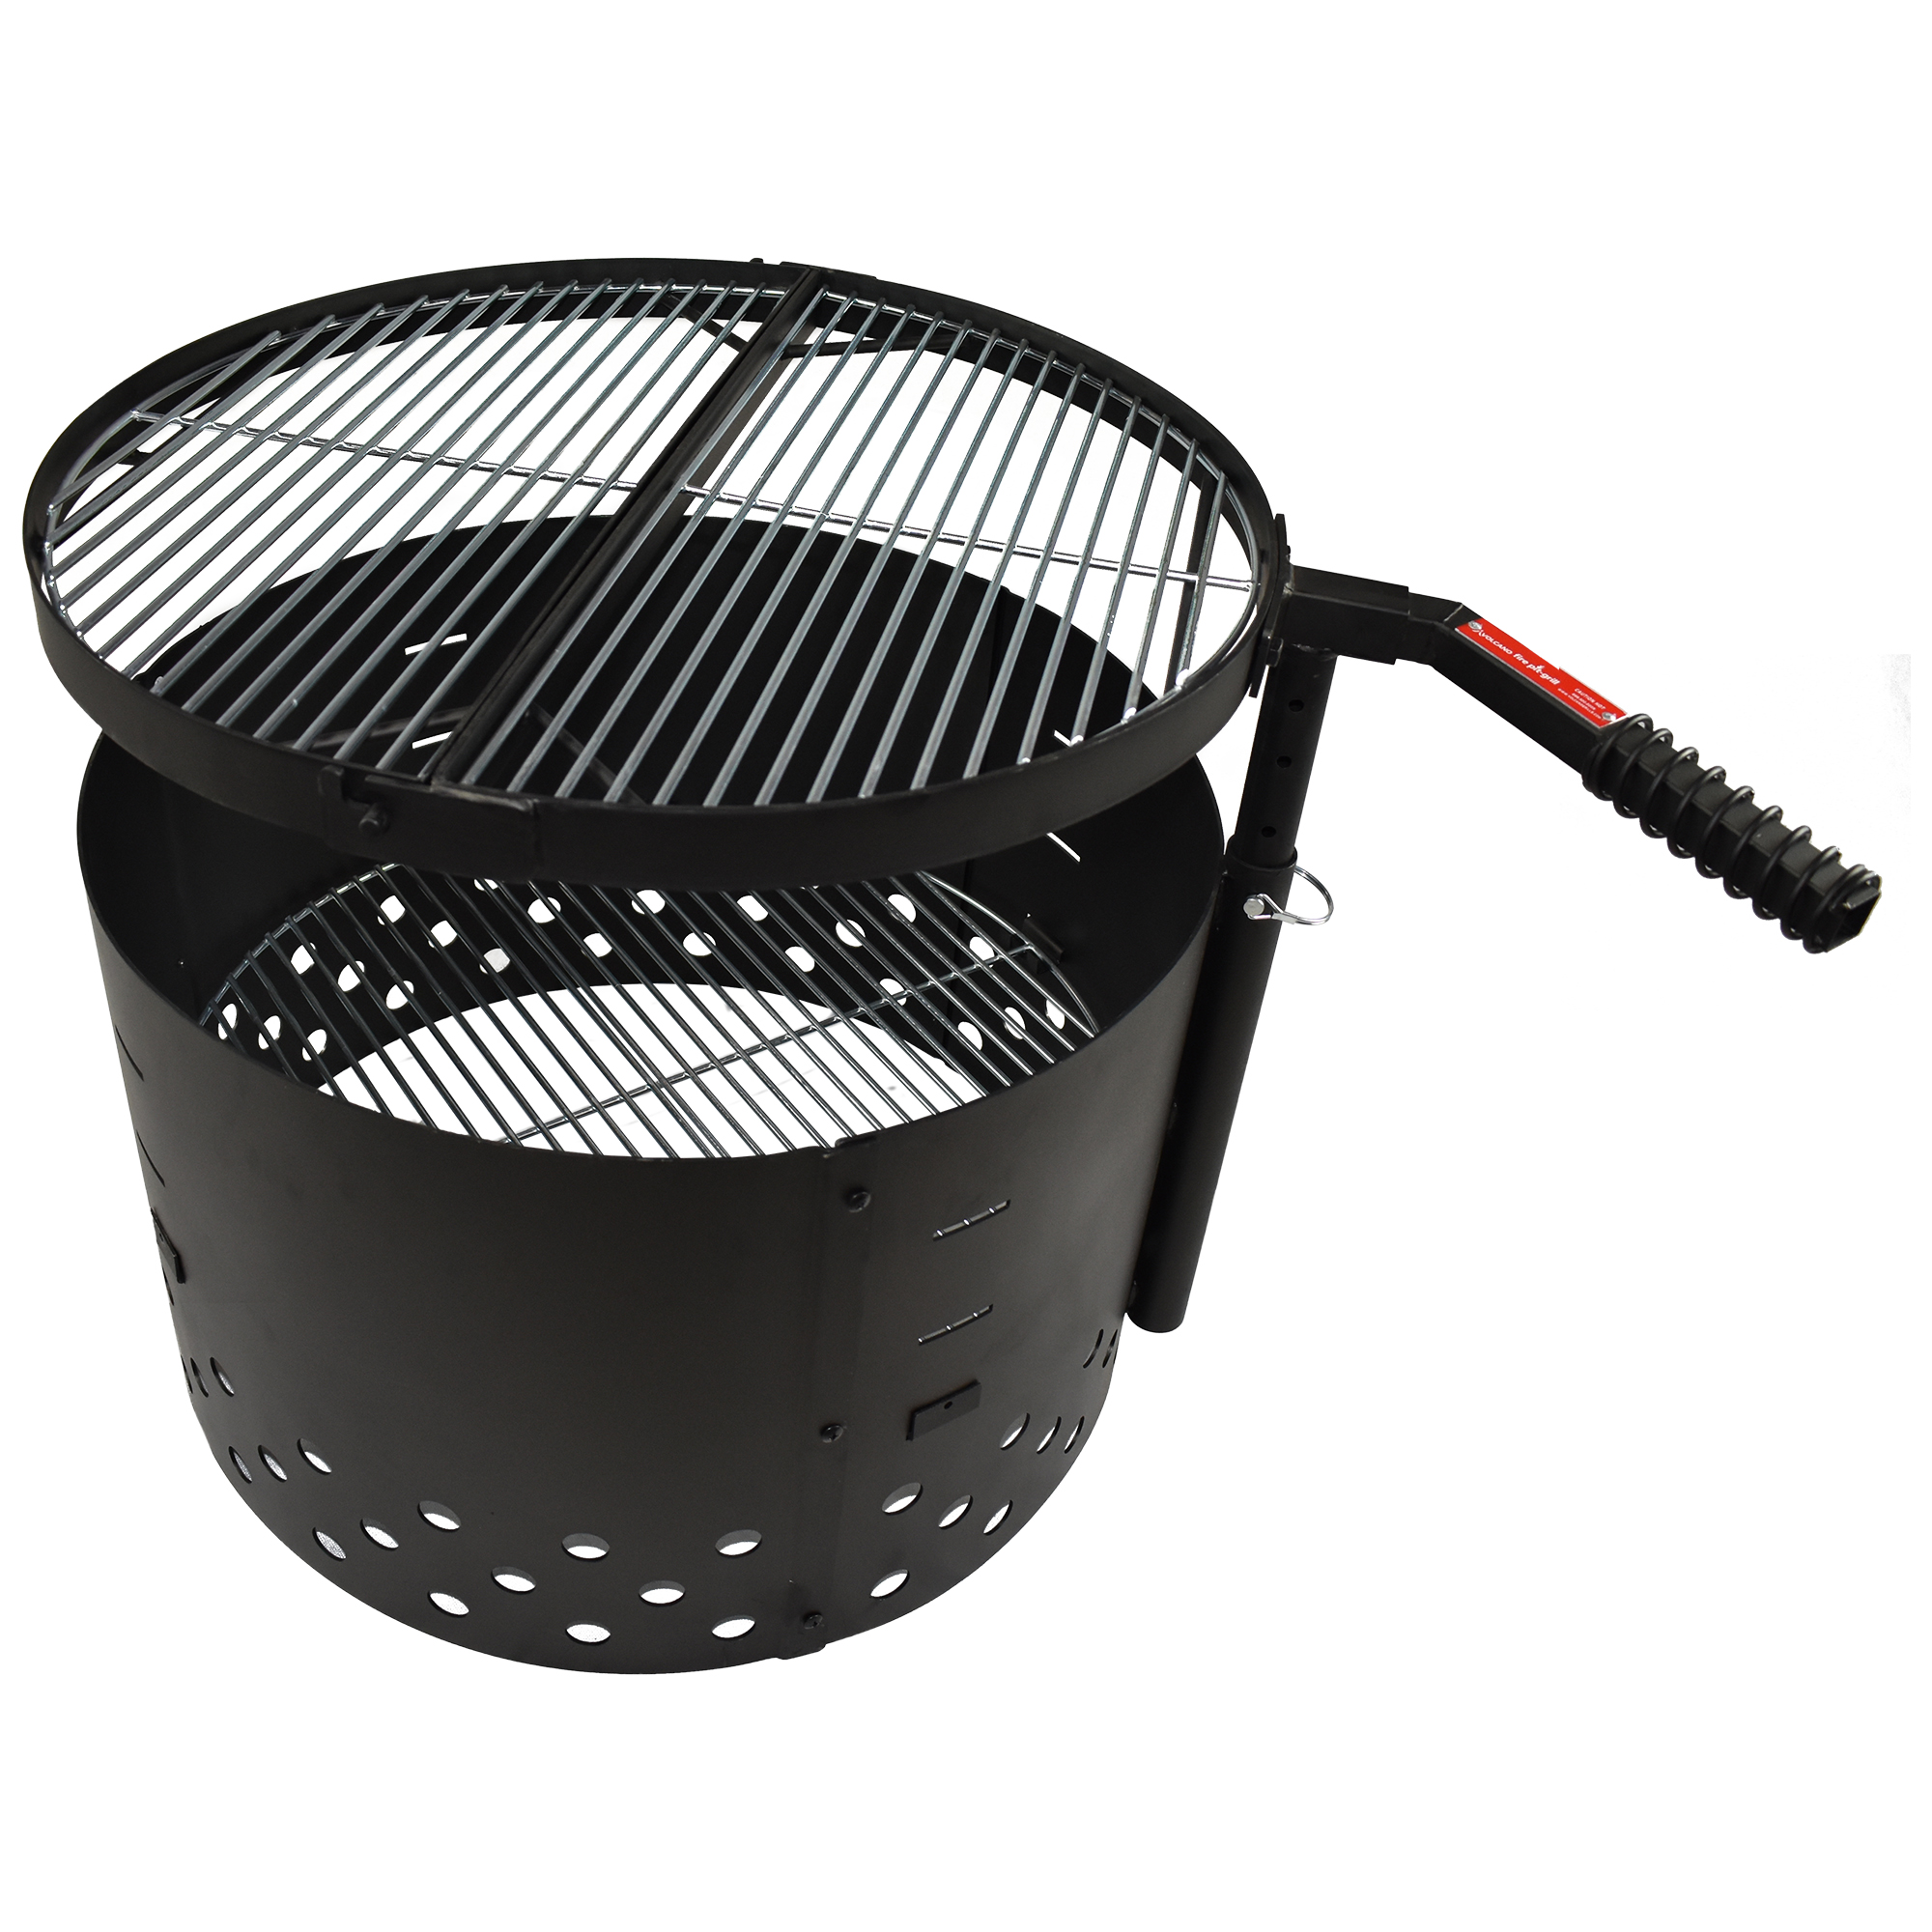 Volcano Fire Pit Grill Grills, Fire Pit Grill